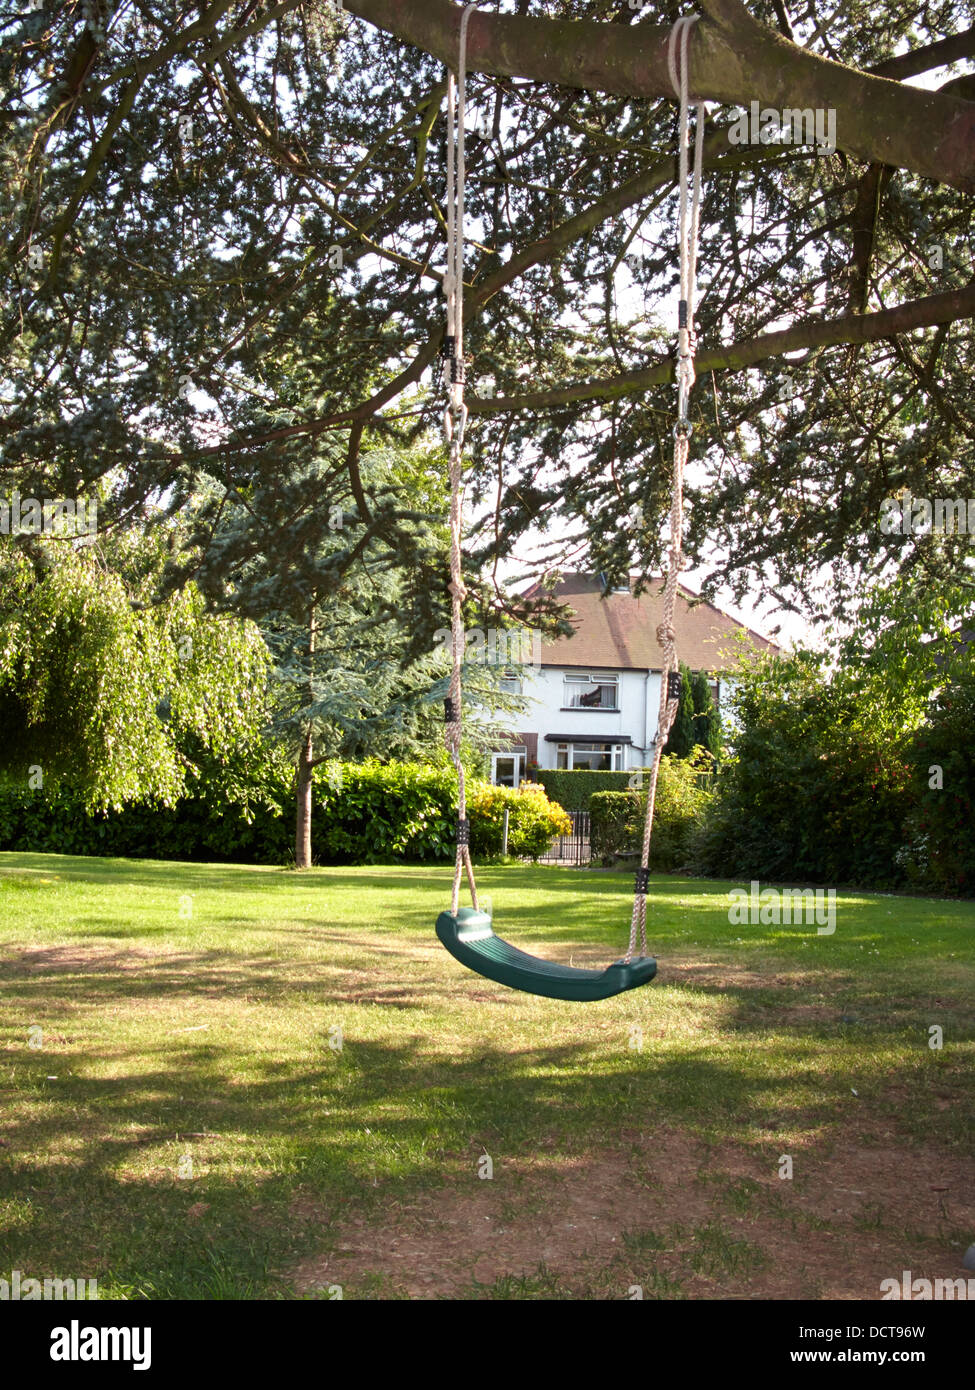 empty childs swing in a garden in the uk Stock Photo